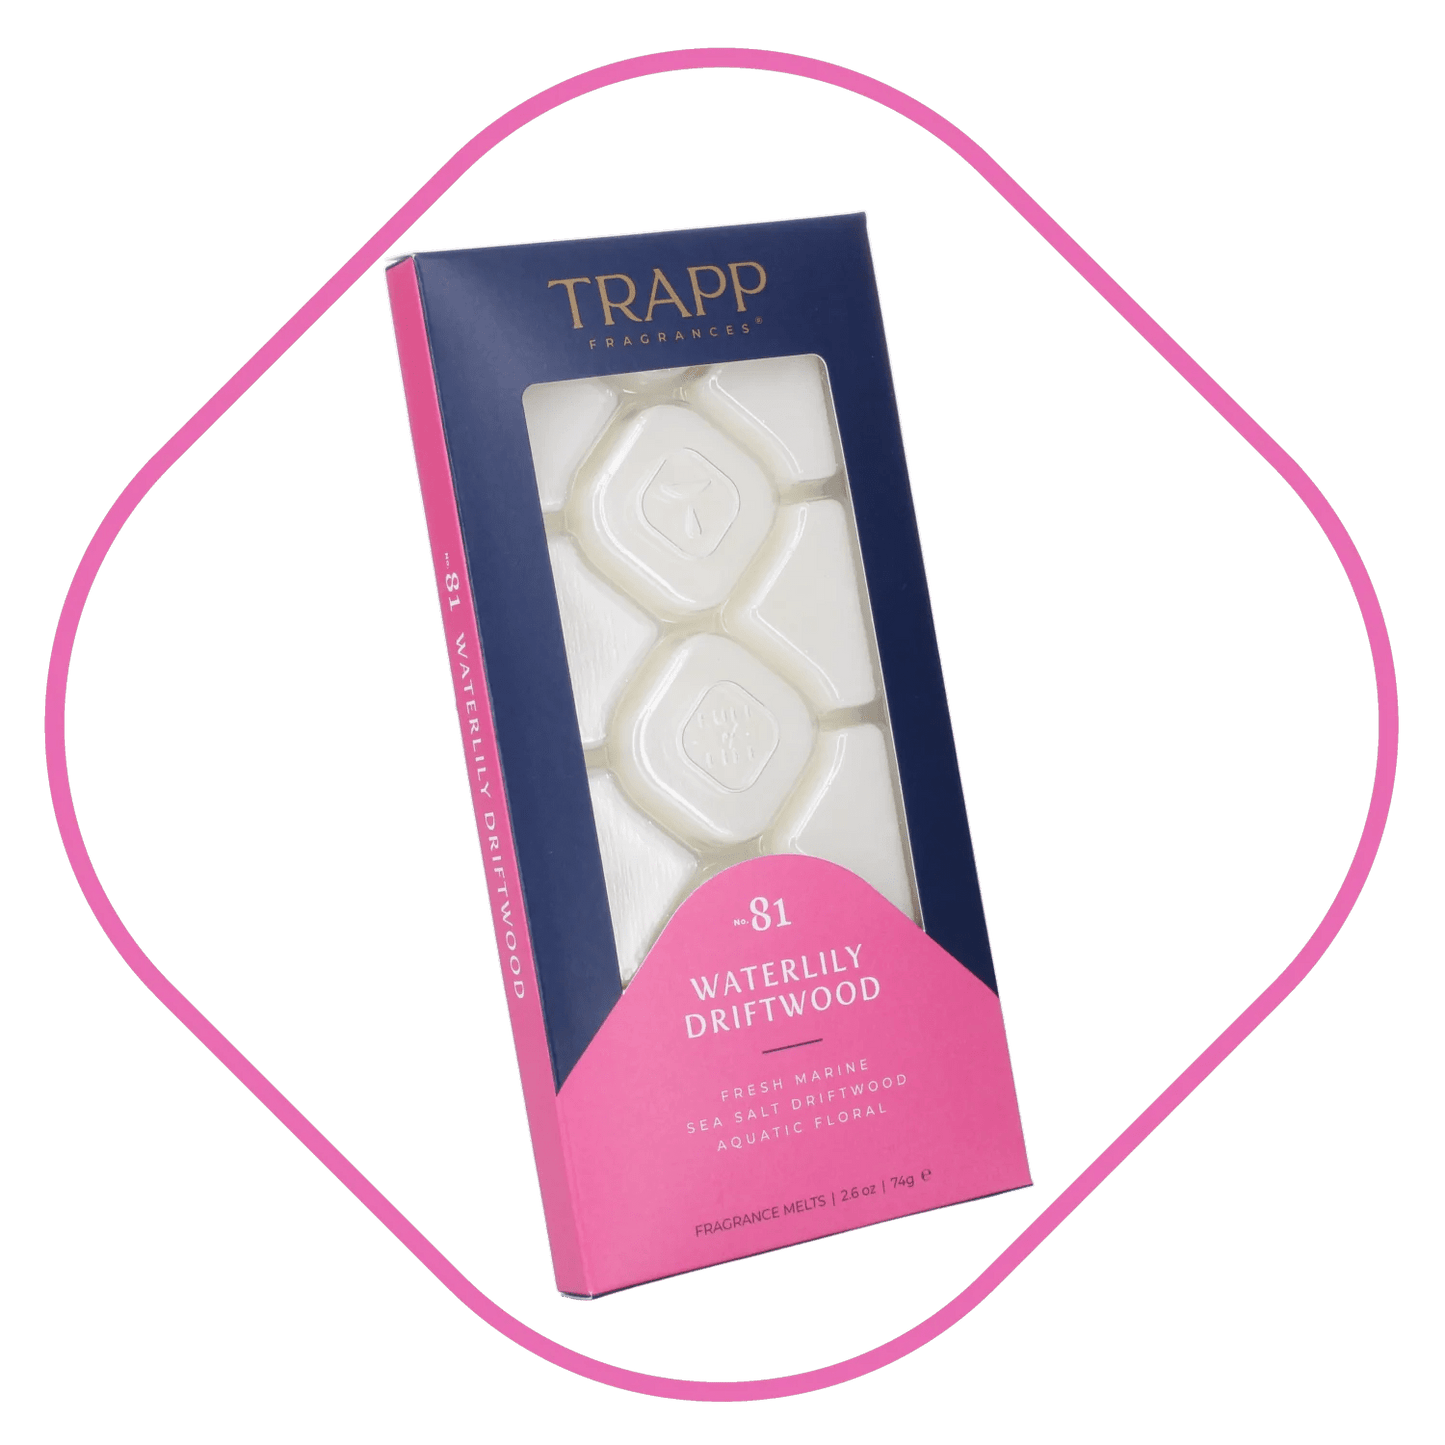 Trapp No.81 Waterlily Driftwood Fragrance Melts